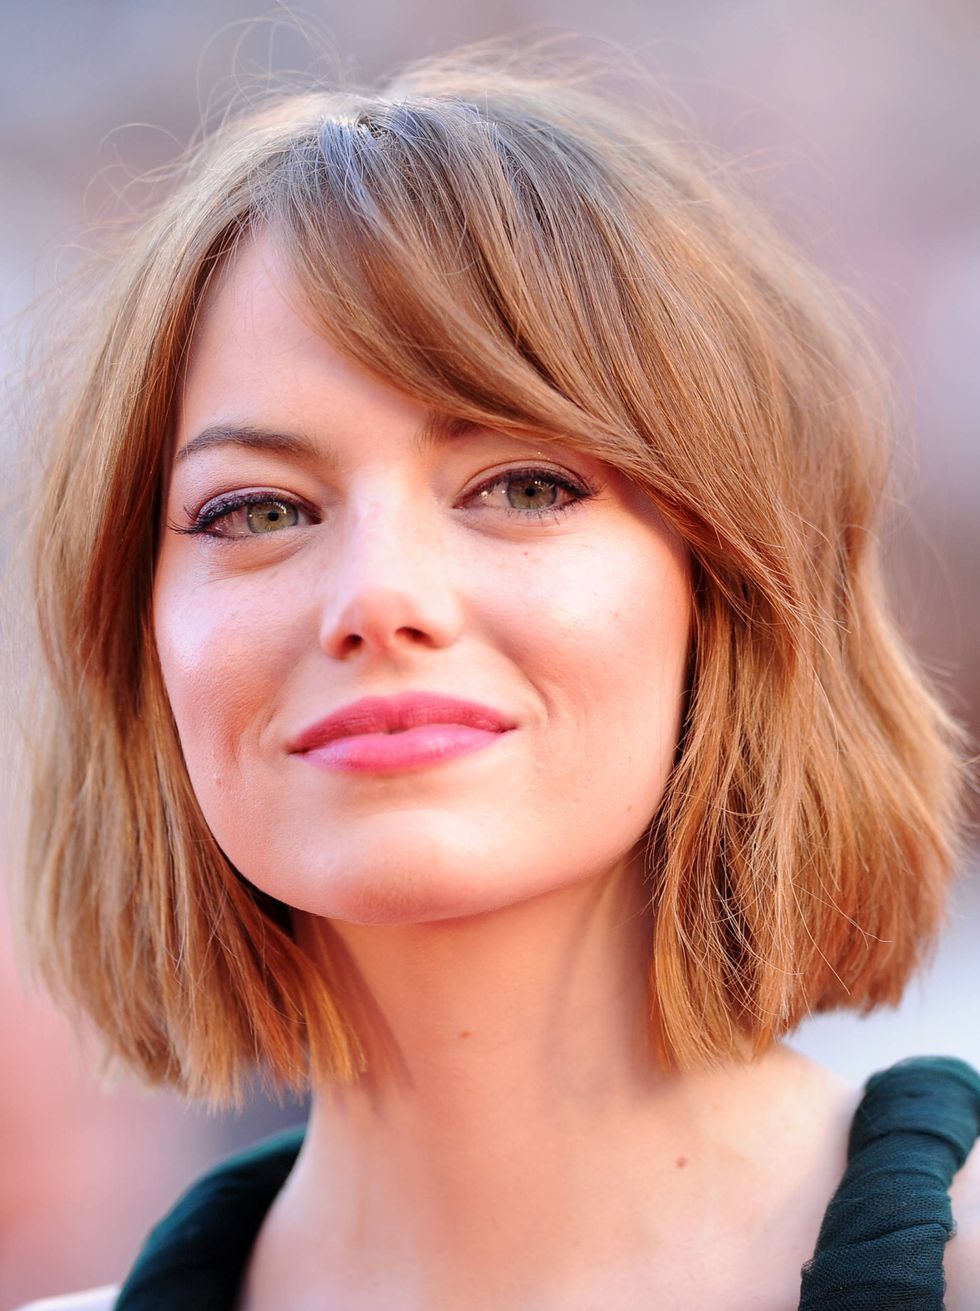 62 Bob Hairstyles That'll Convince You To Go For The Chop | Beauty ...